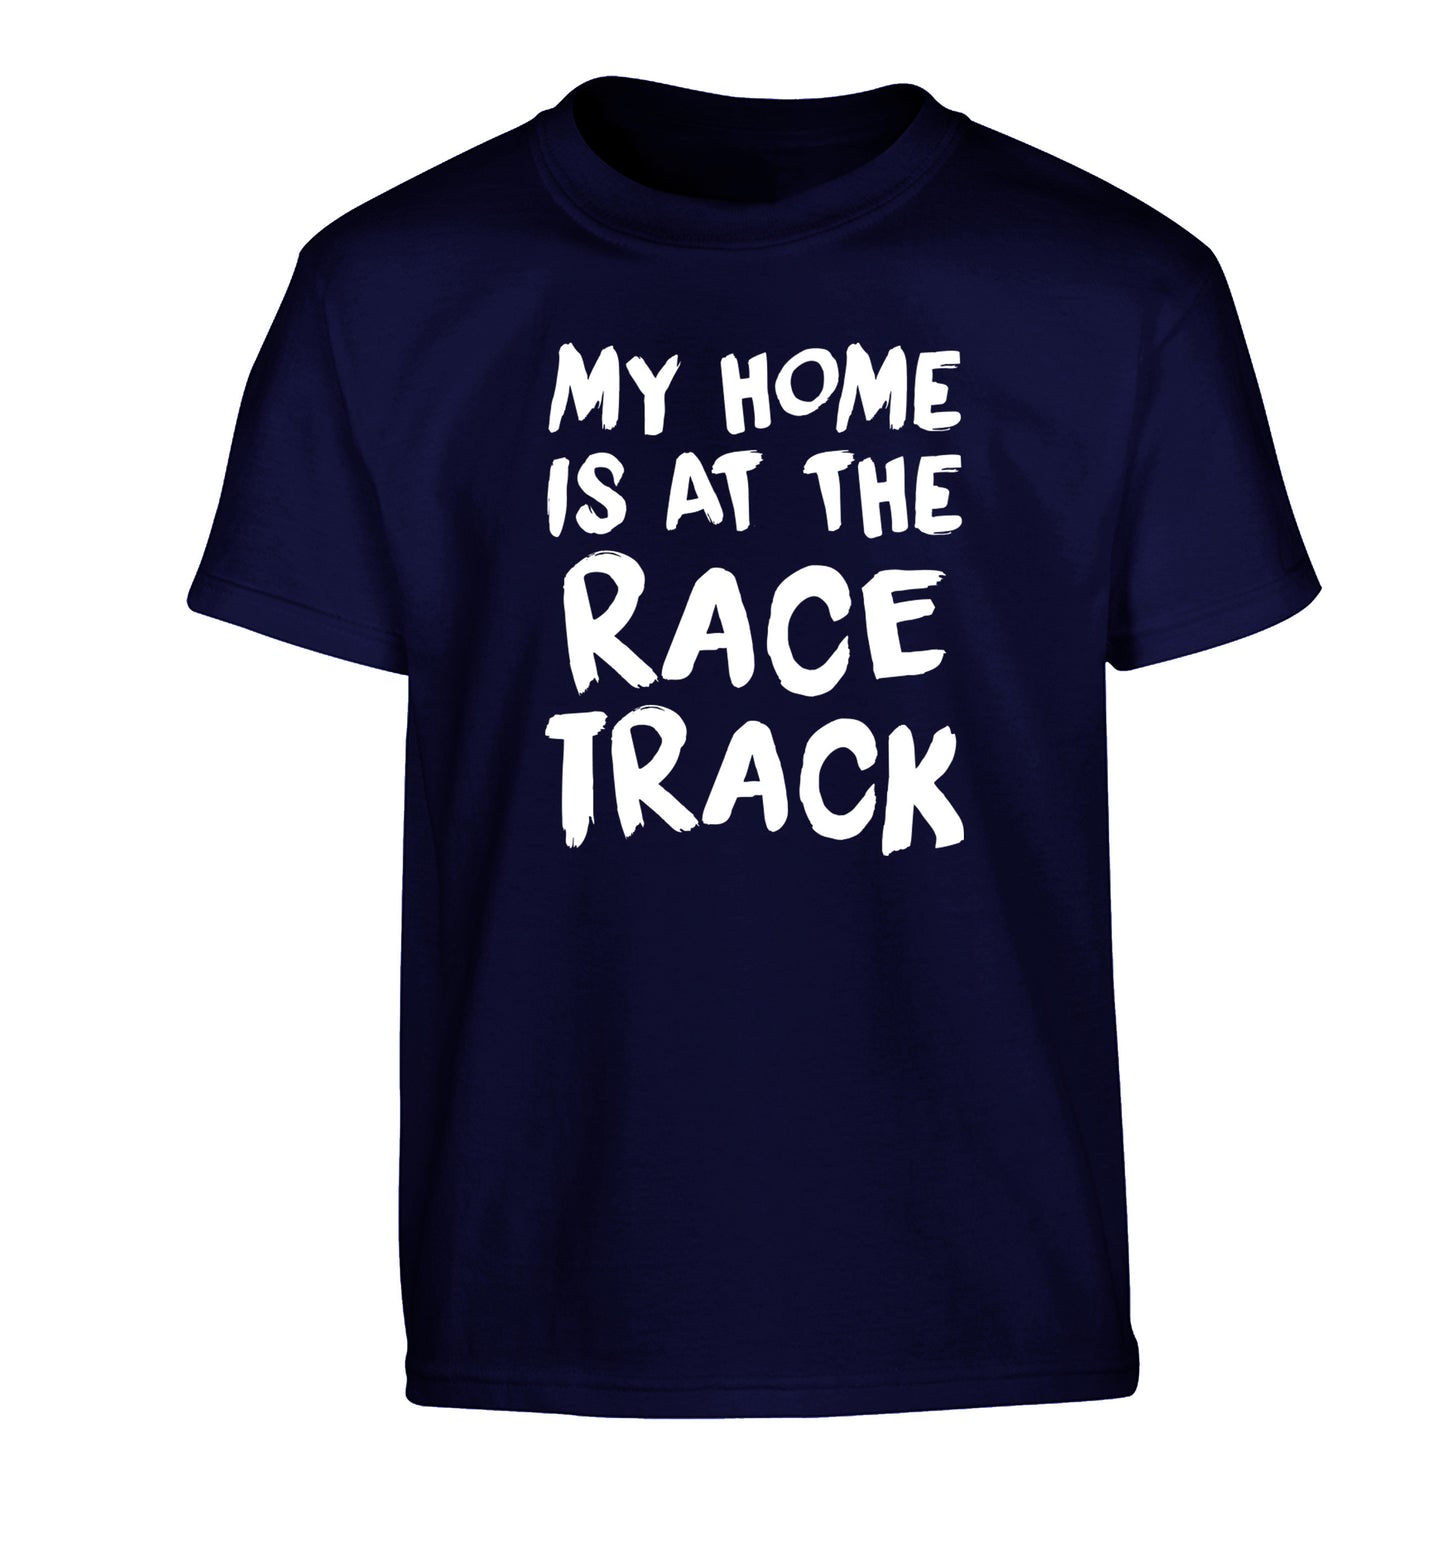 My home is at the race track Children's navy Tshirt 12-14 Years